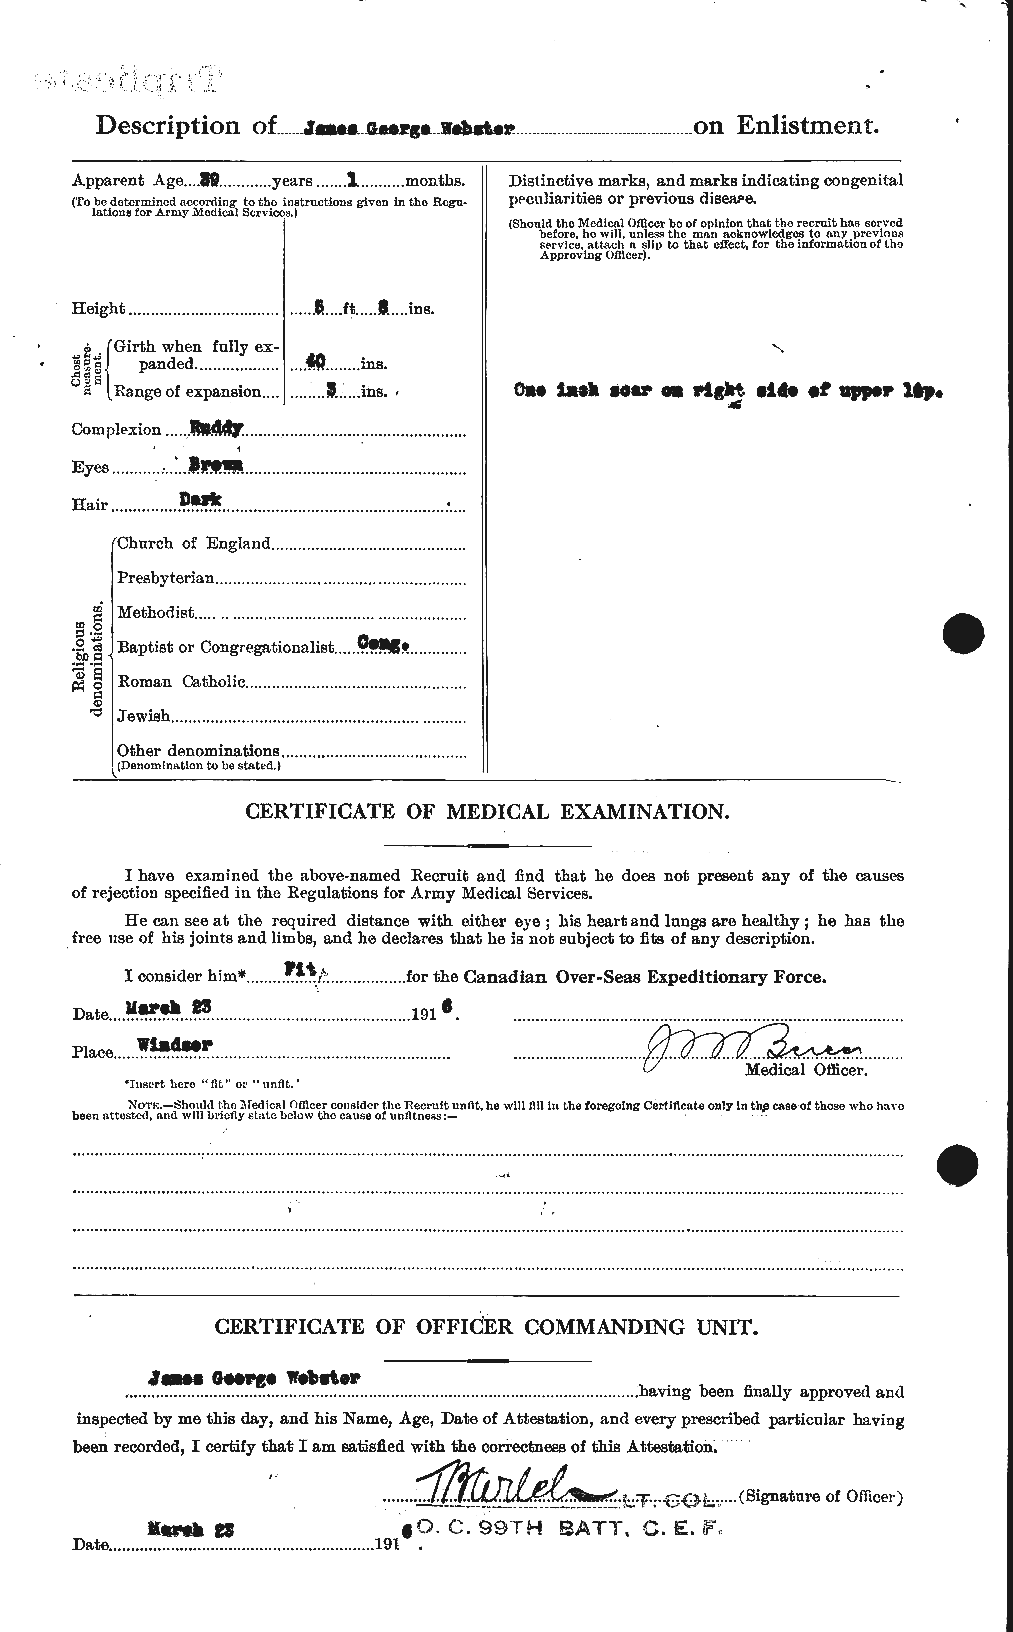 Personnel Records of the First World War - CEF 670459b